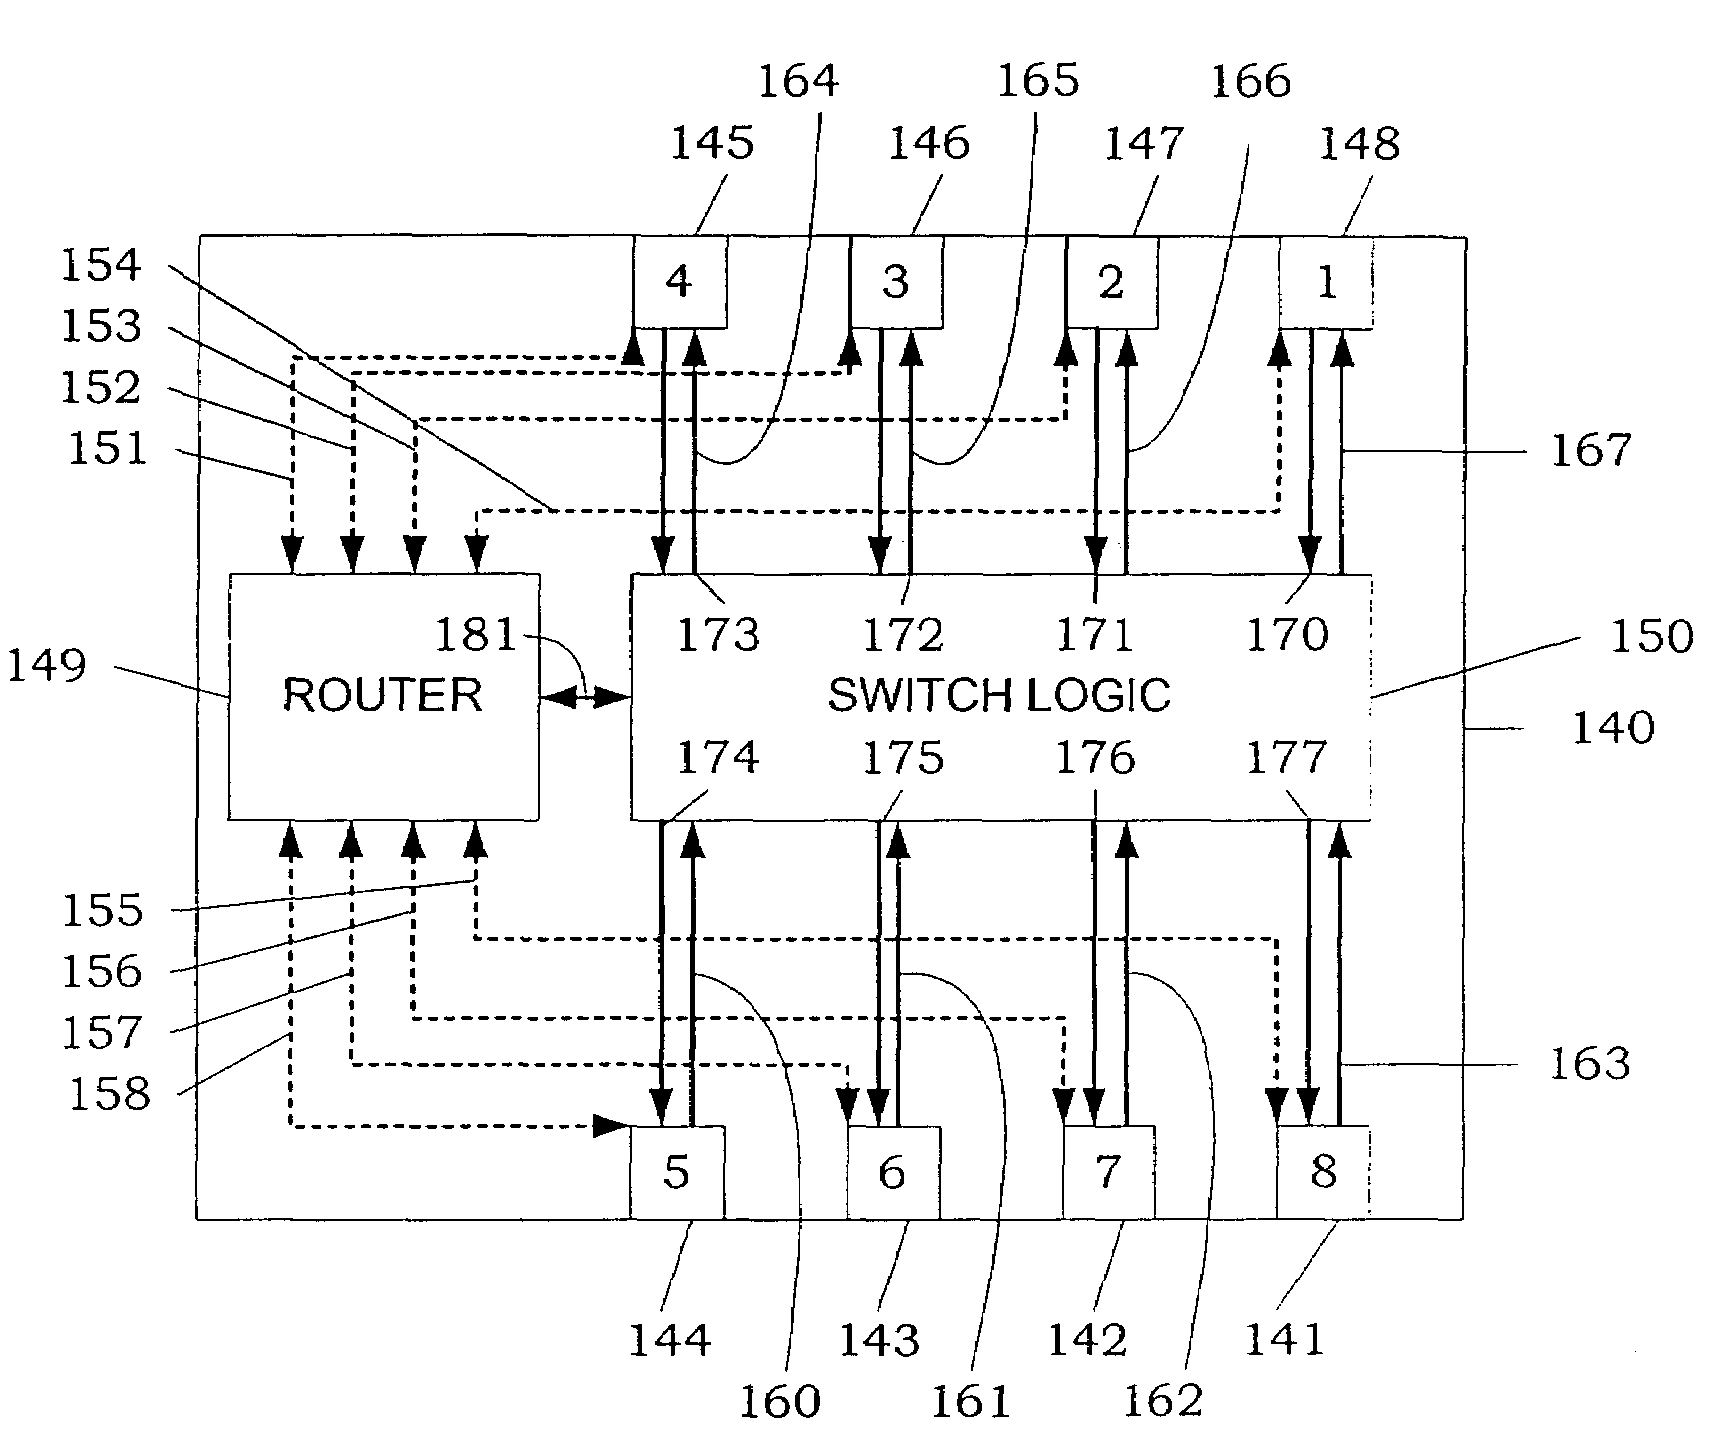 Methods and apparatus for switching fibre channel arbitrated loop devices